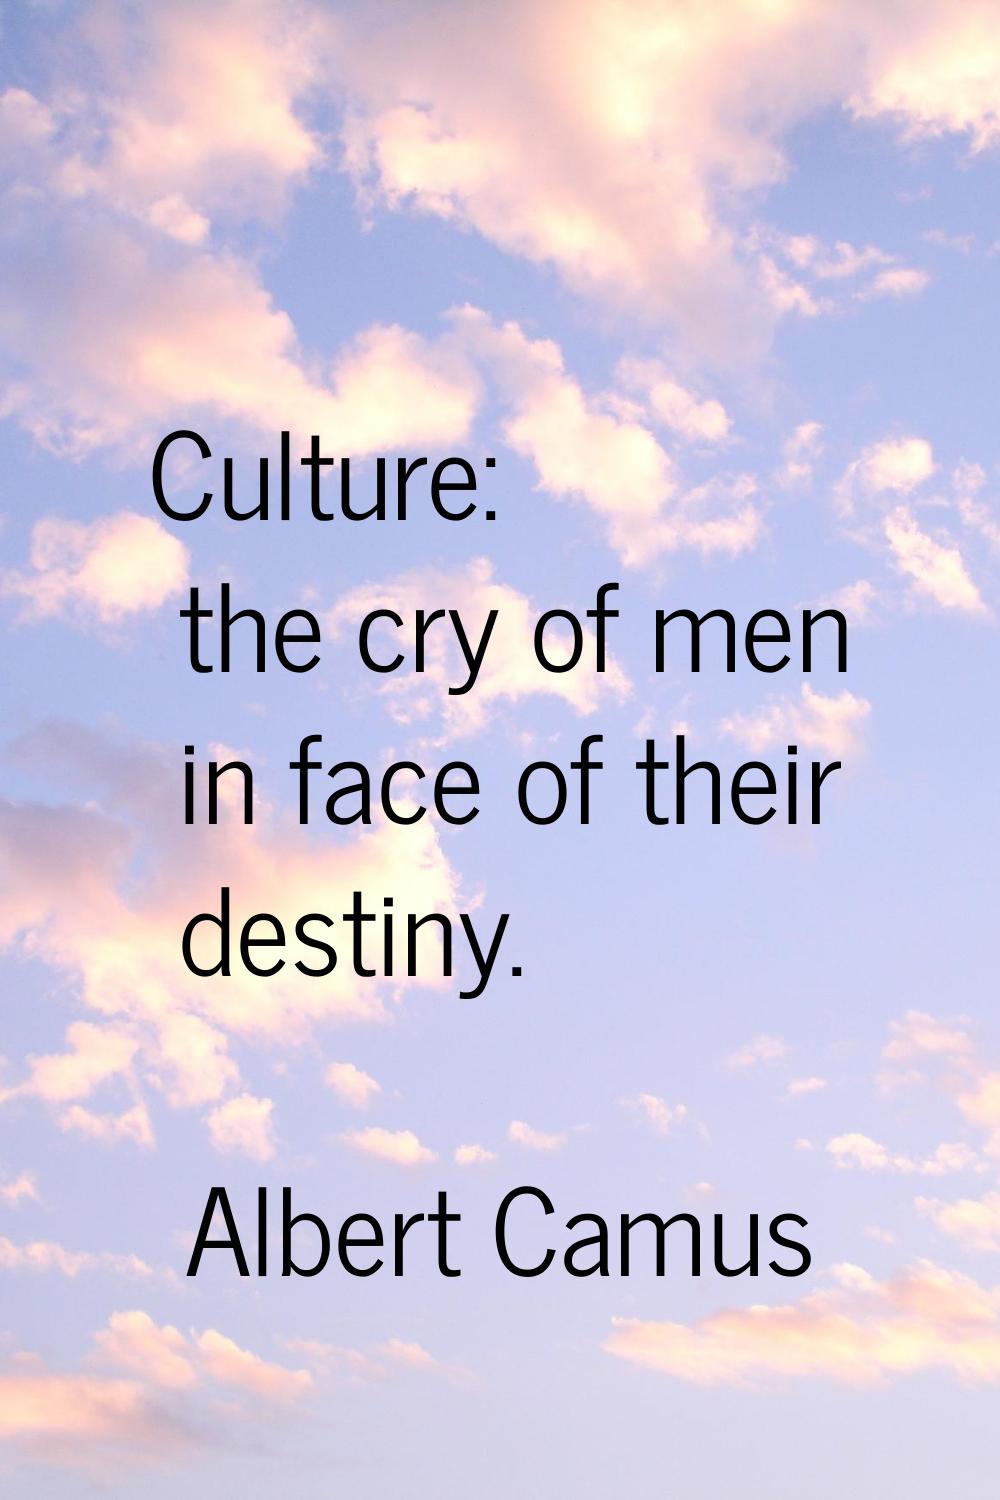 Culture: the cry of men in face of their destiny.